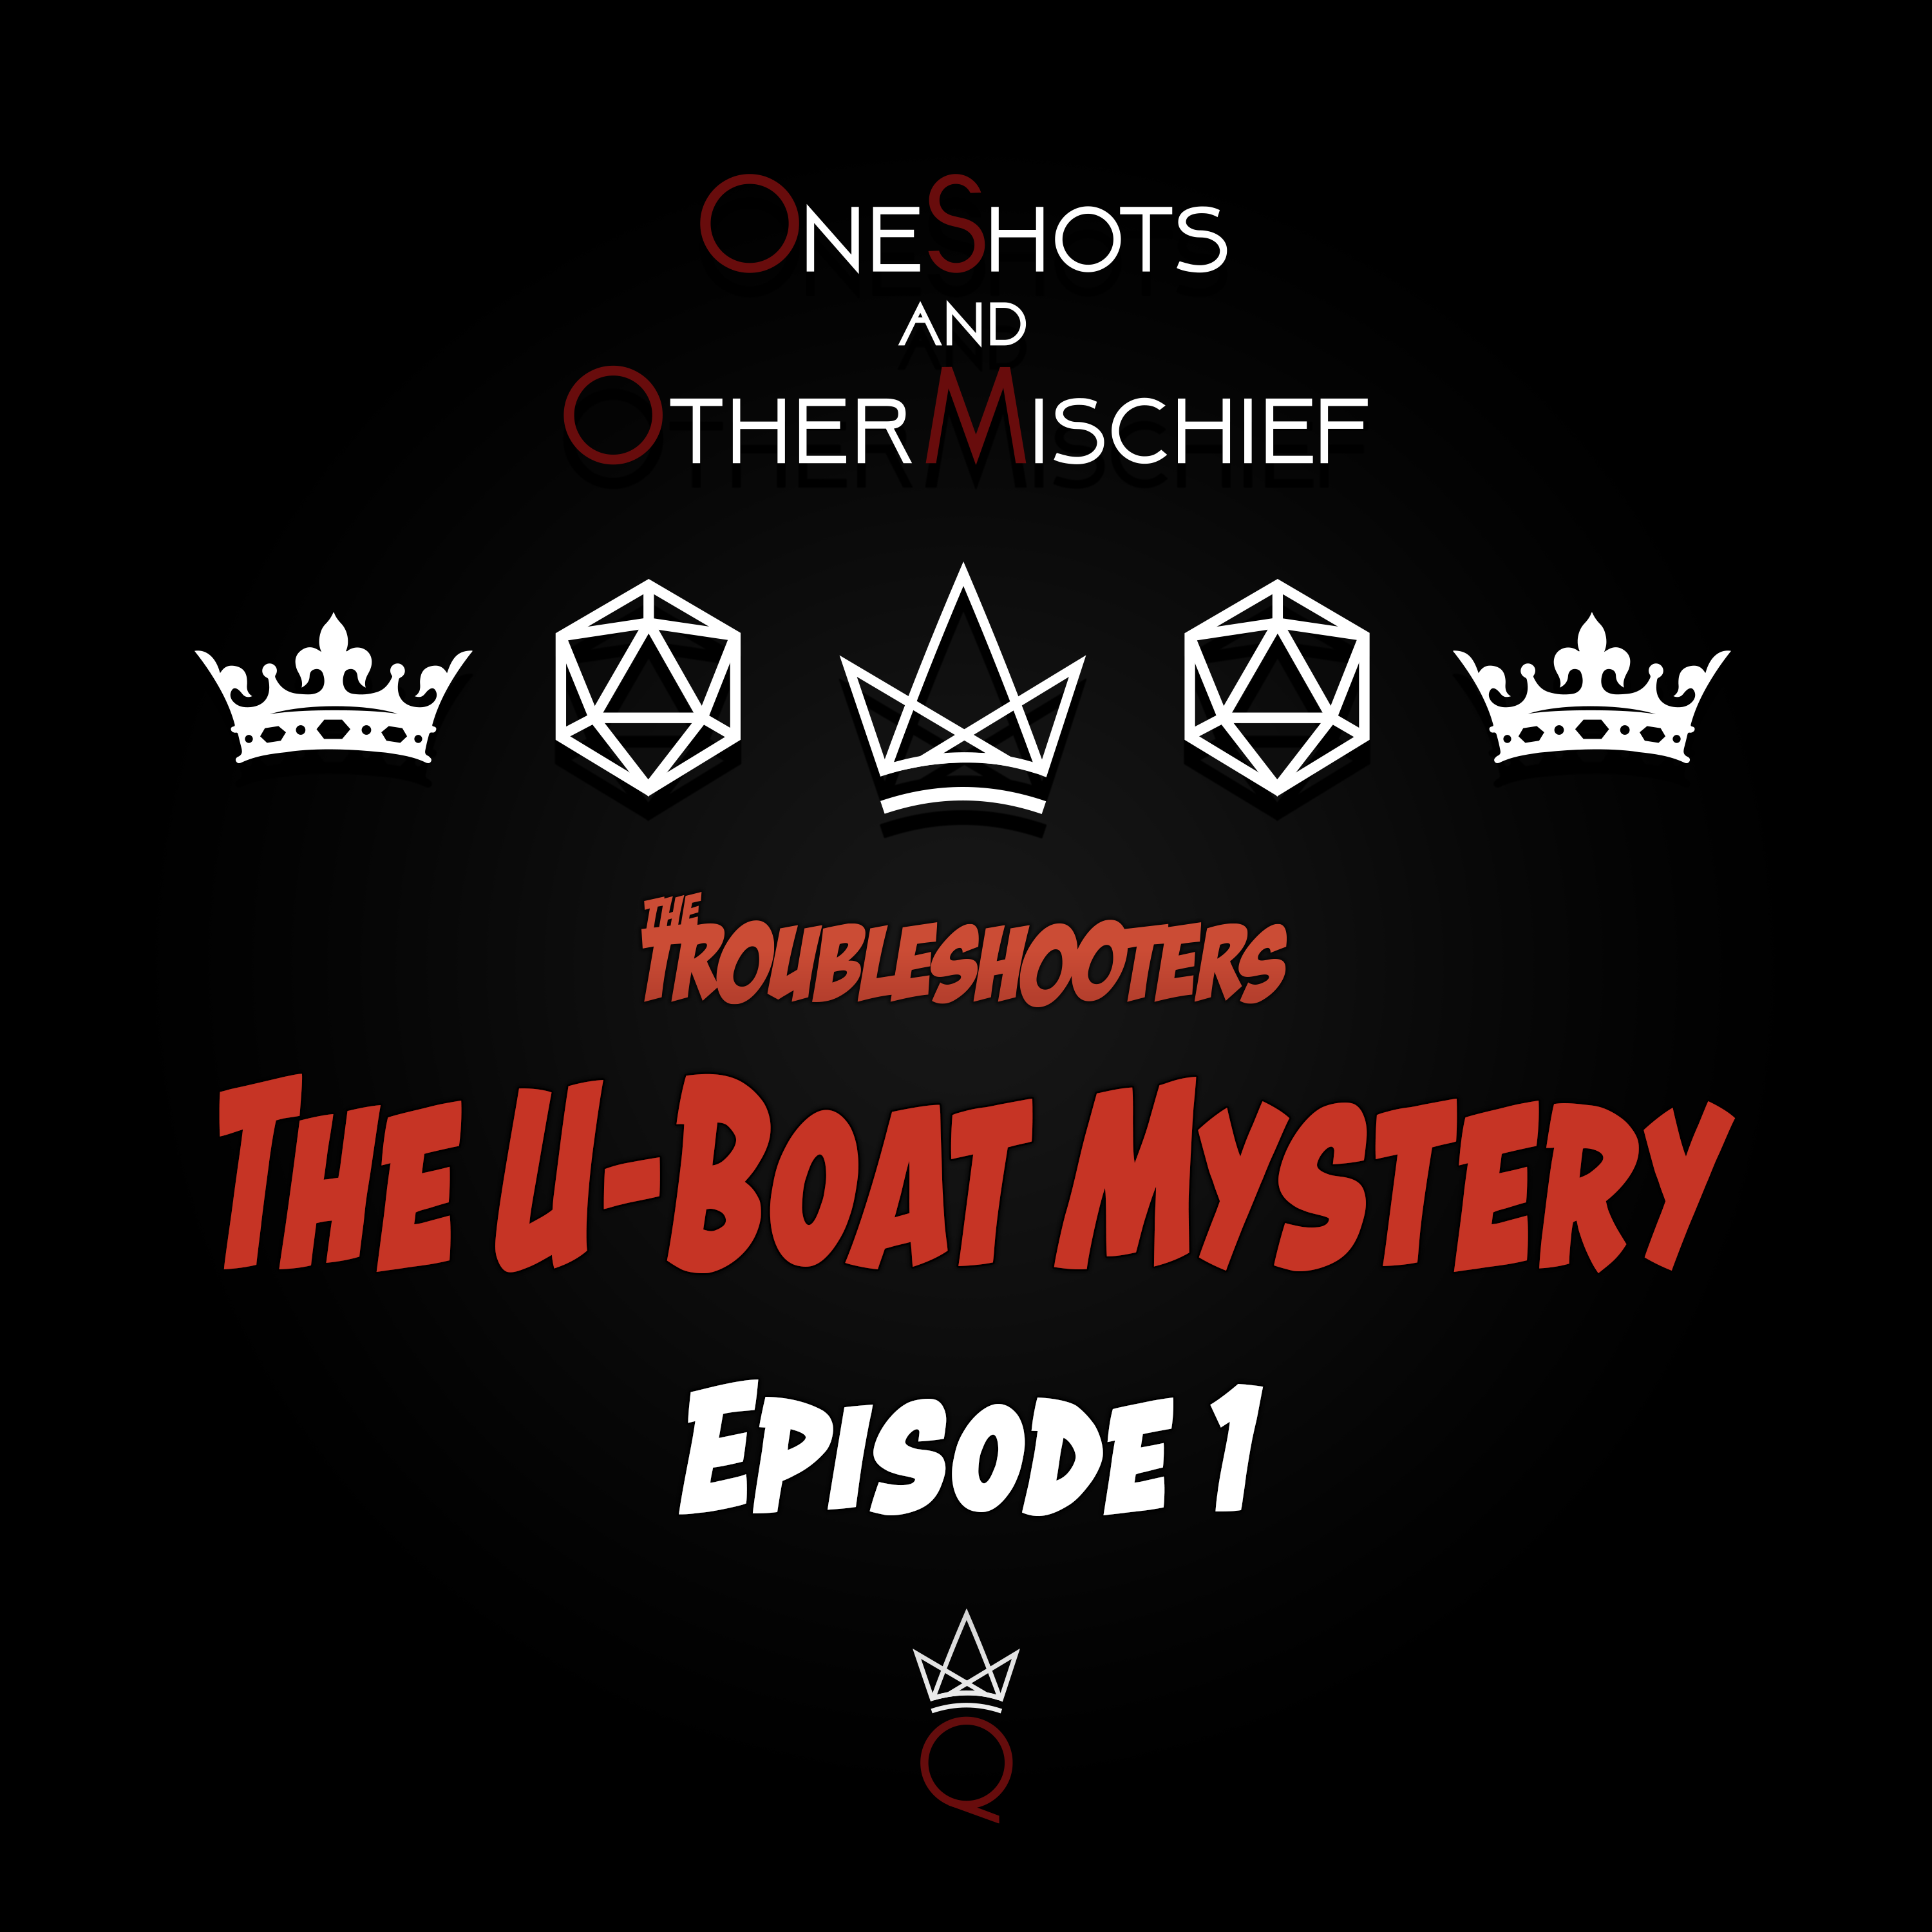 The Troubleshooters - The U-Boat Mystery, Episode 1